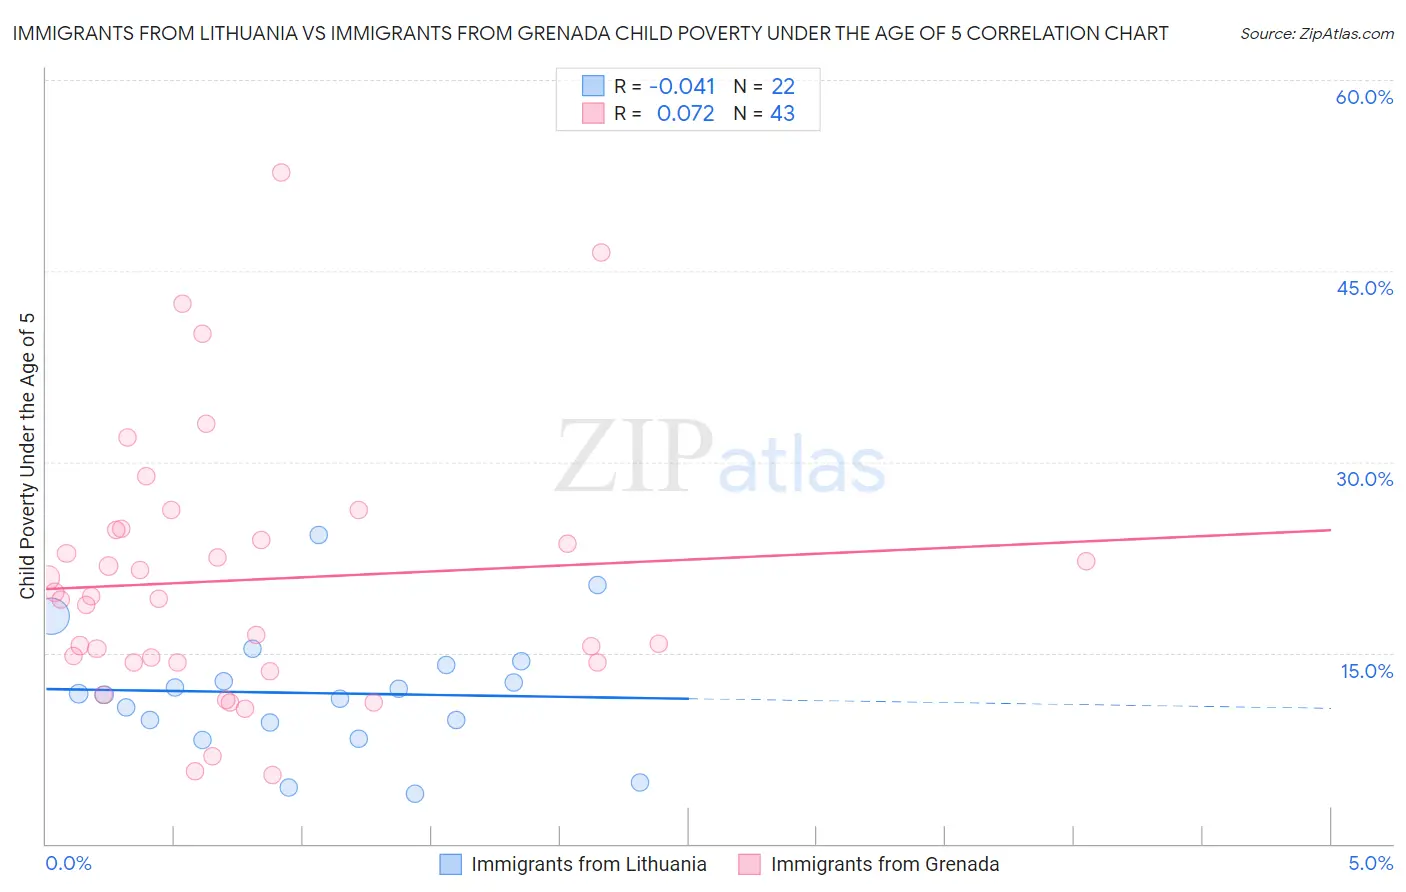 Immigrants from Lithuania vs Immigrants from Grenada Child Poverty Under the Age of 5